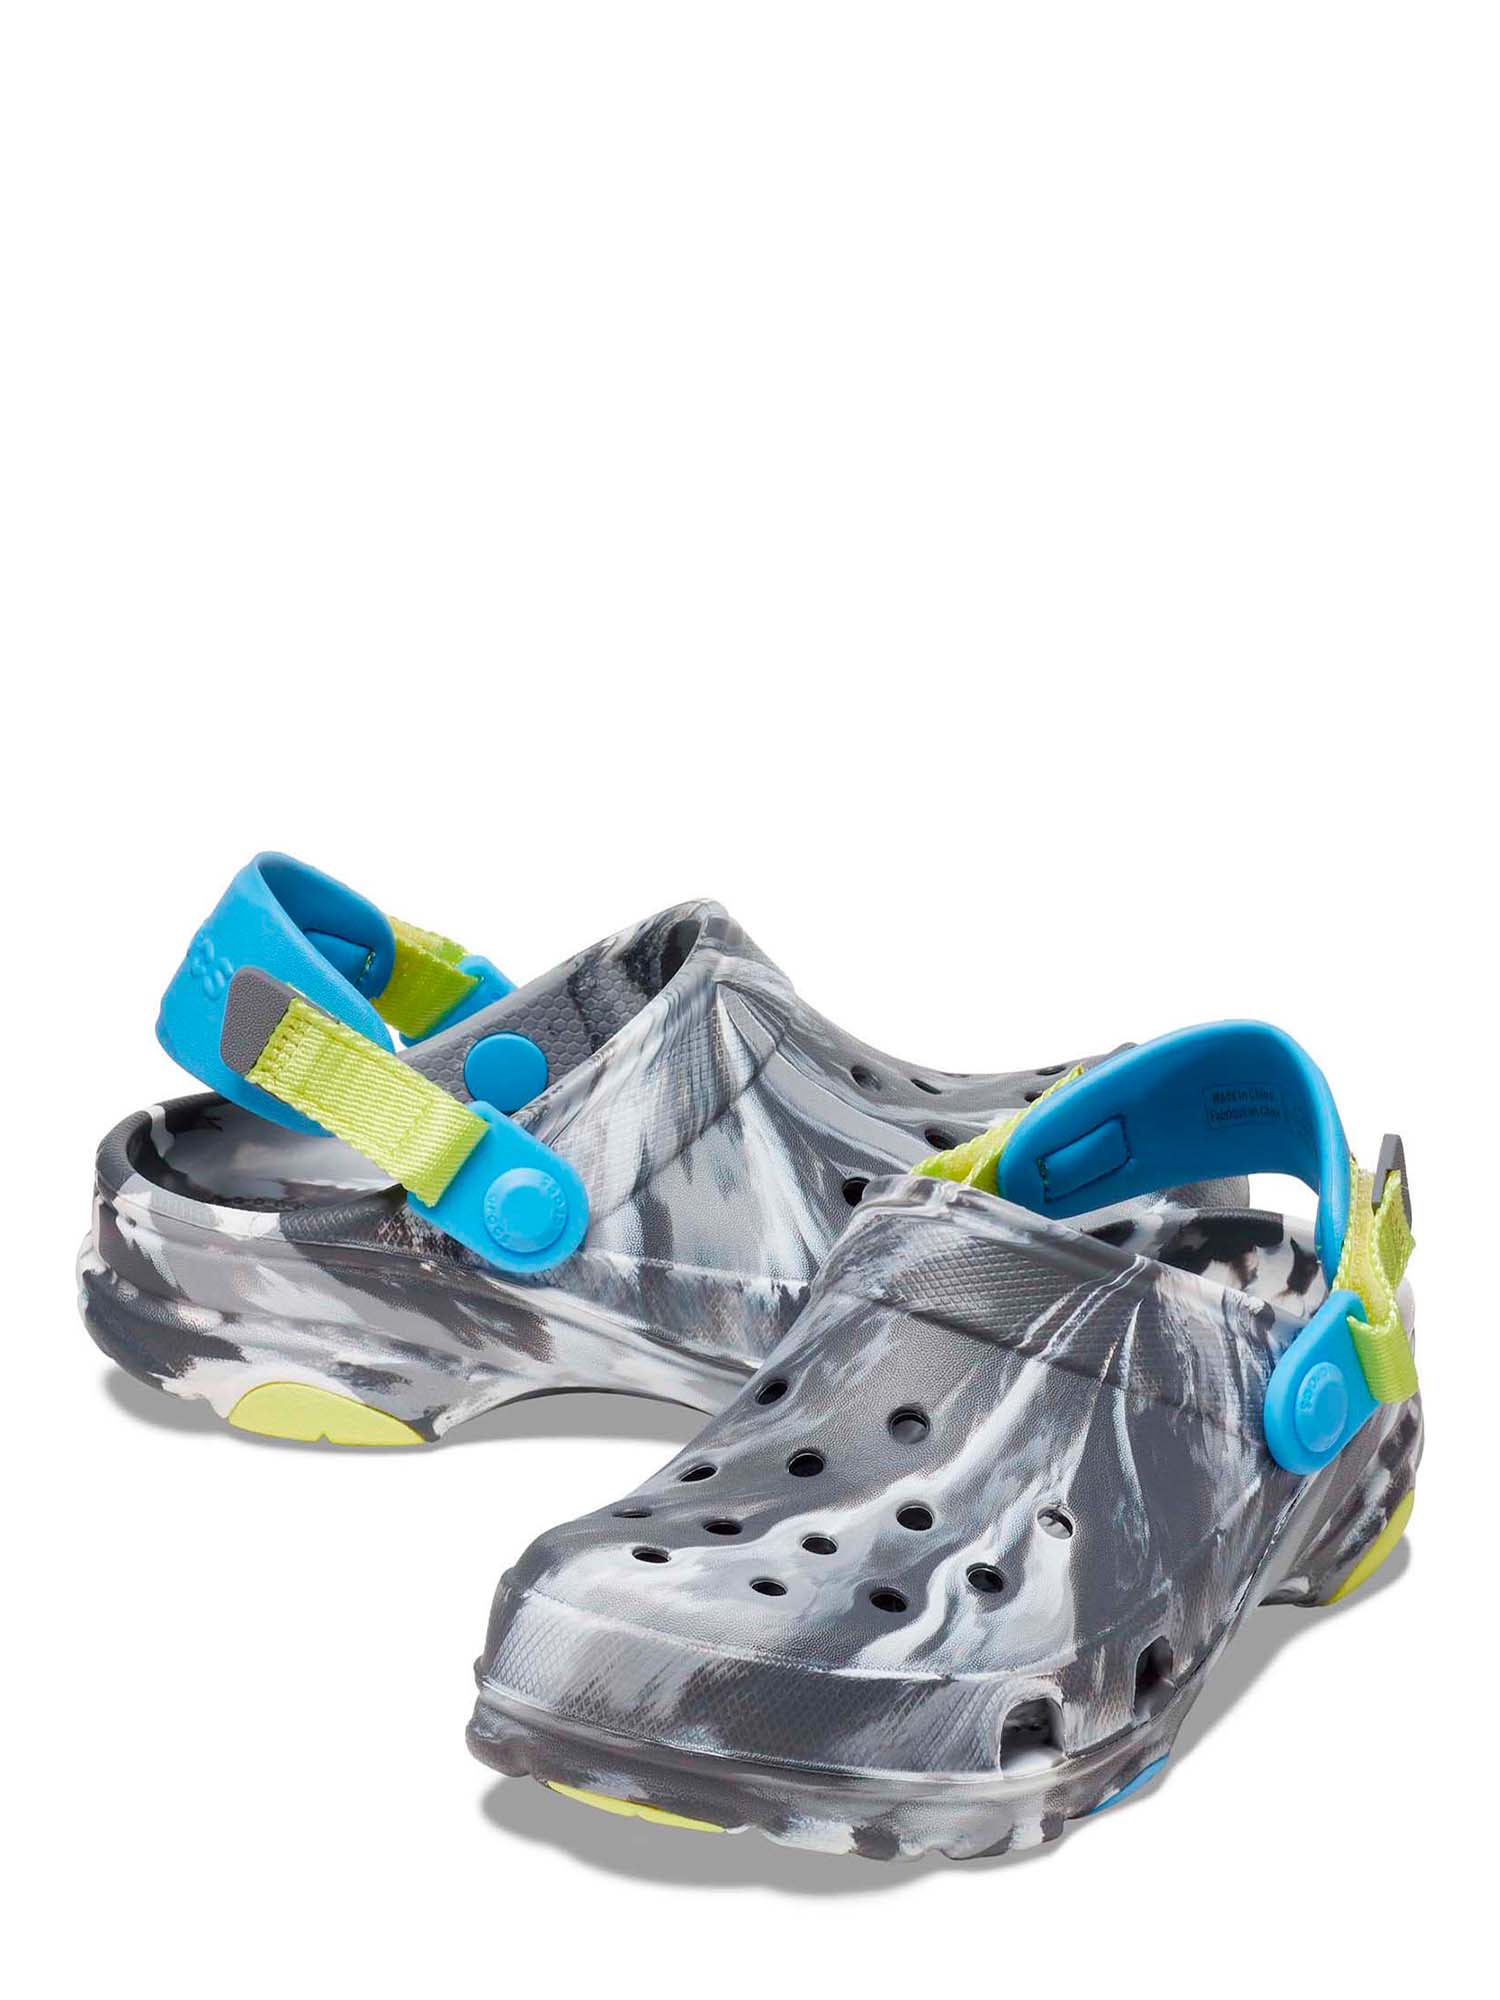 Crocs Toddler Classic All-Terrain Marbled Clog - image 2 of 6